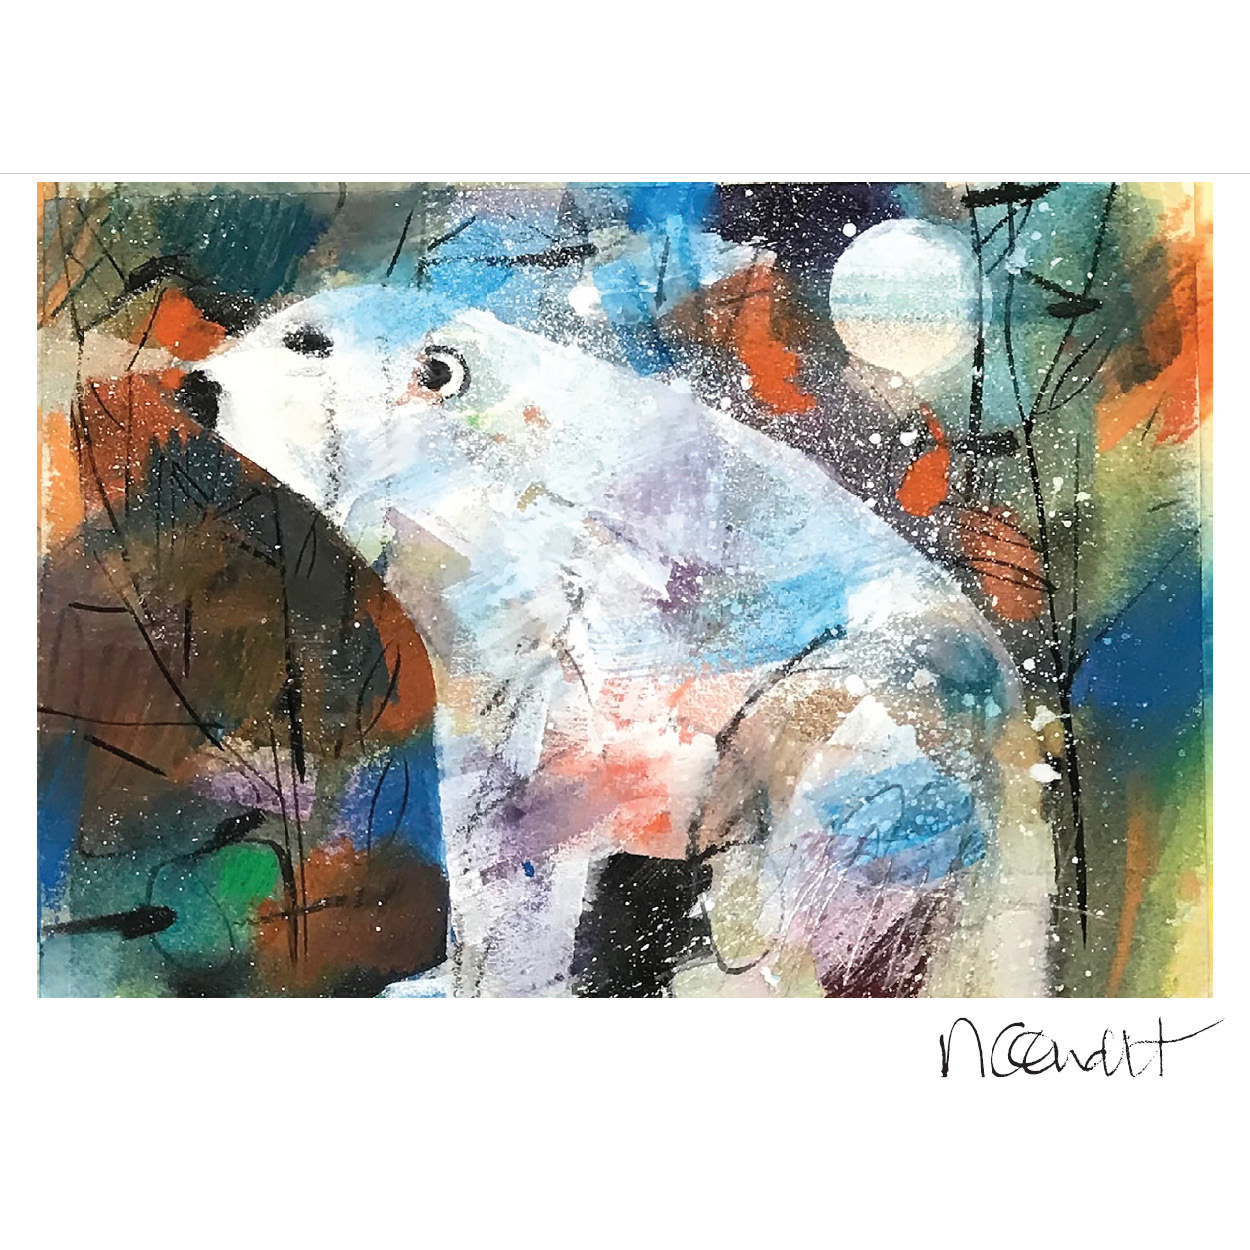 An art piece depicting a polar bear in profile with a background of blues, oranges, greens and browns.